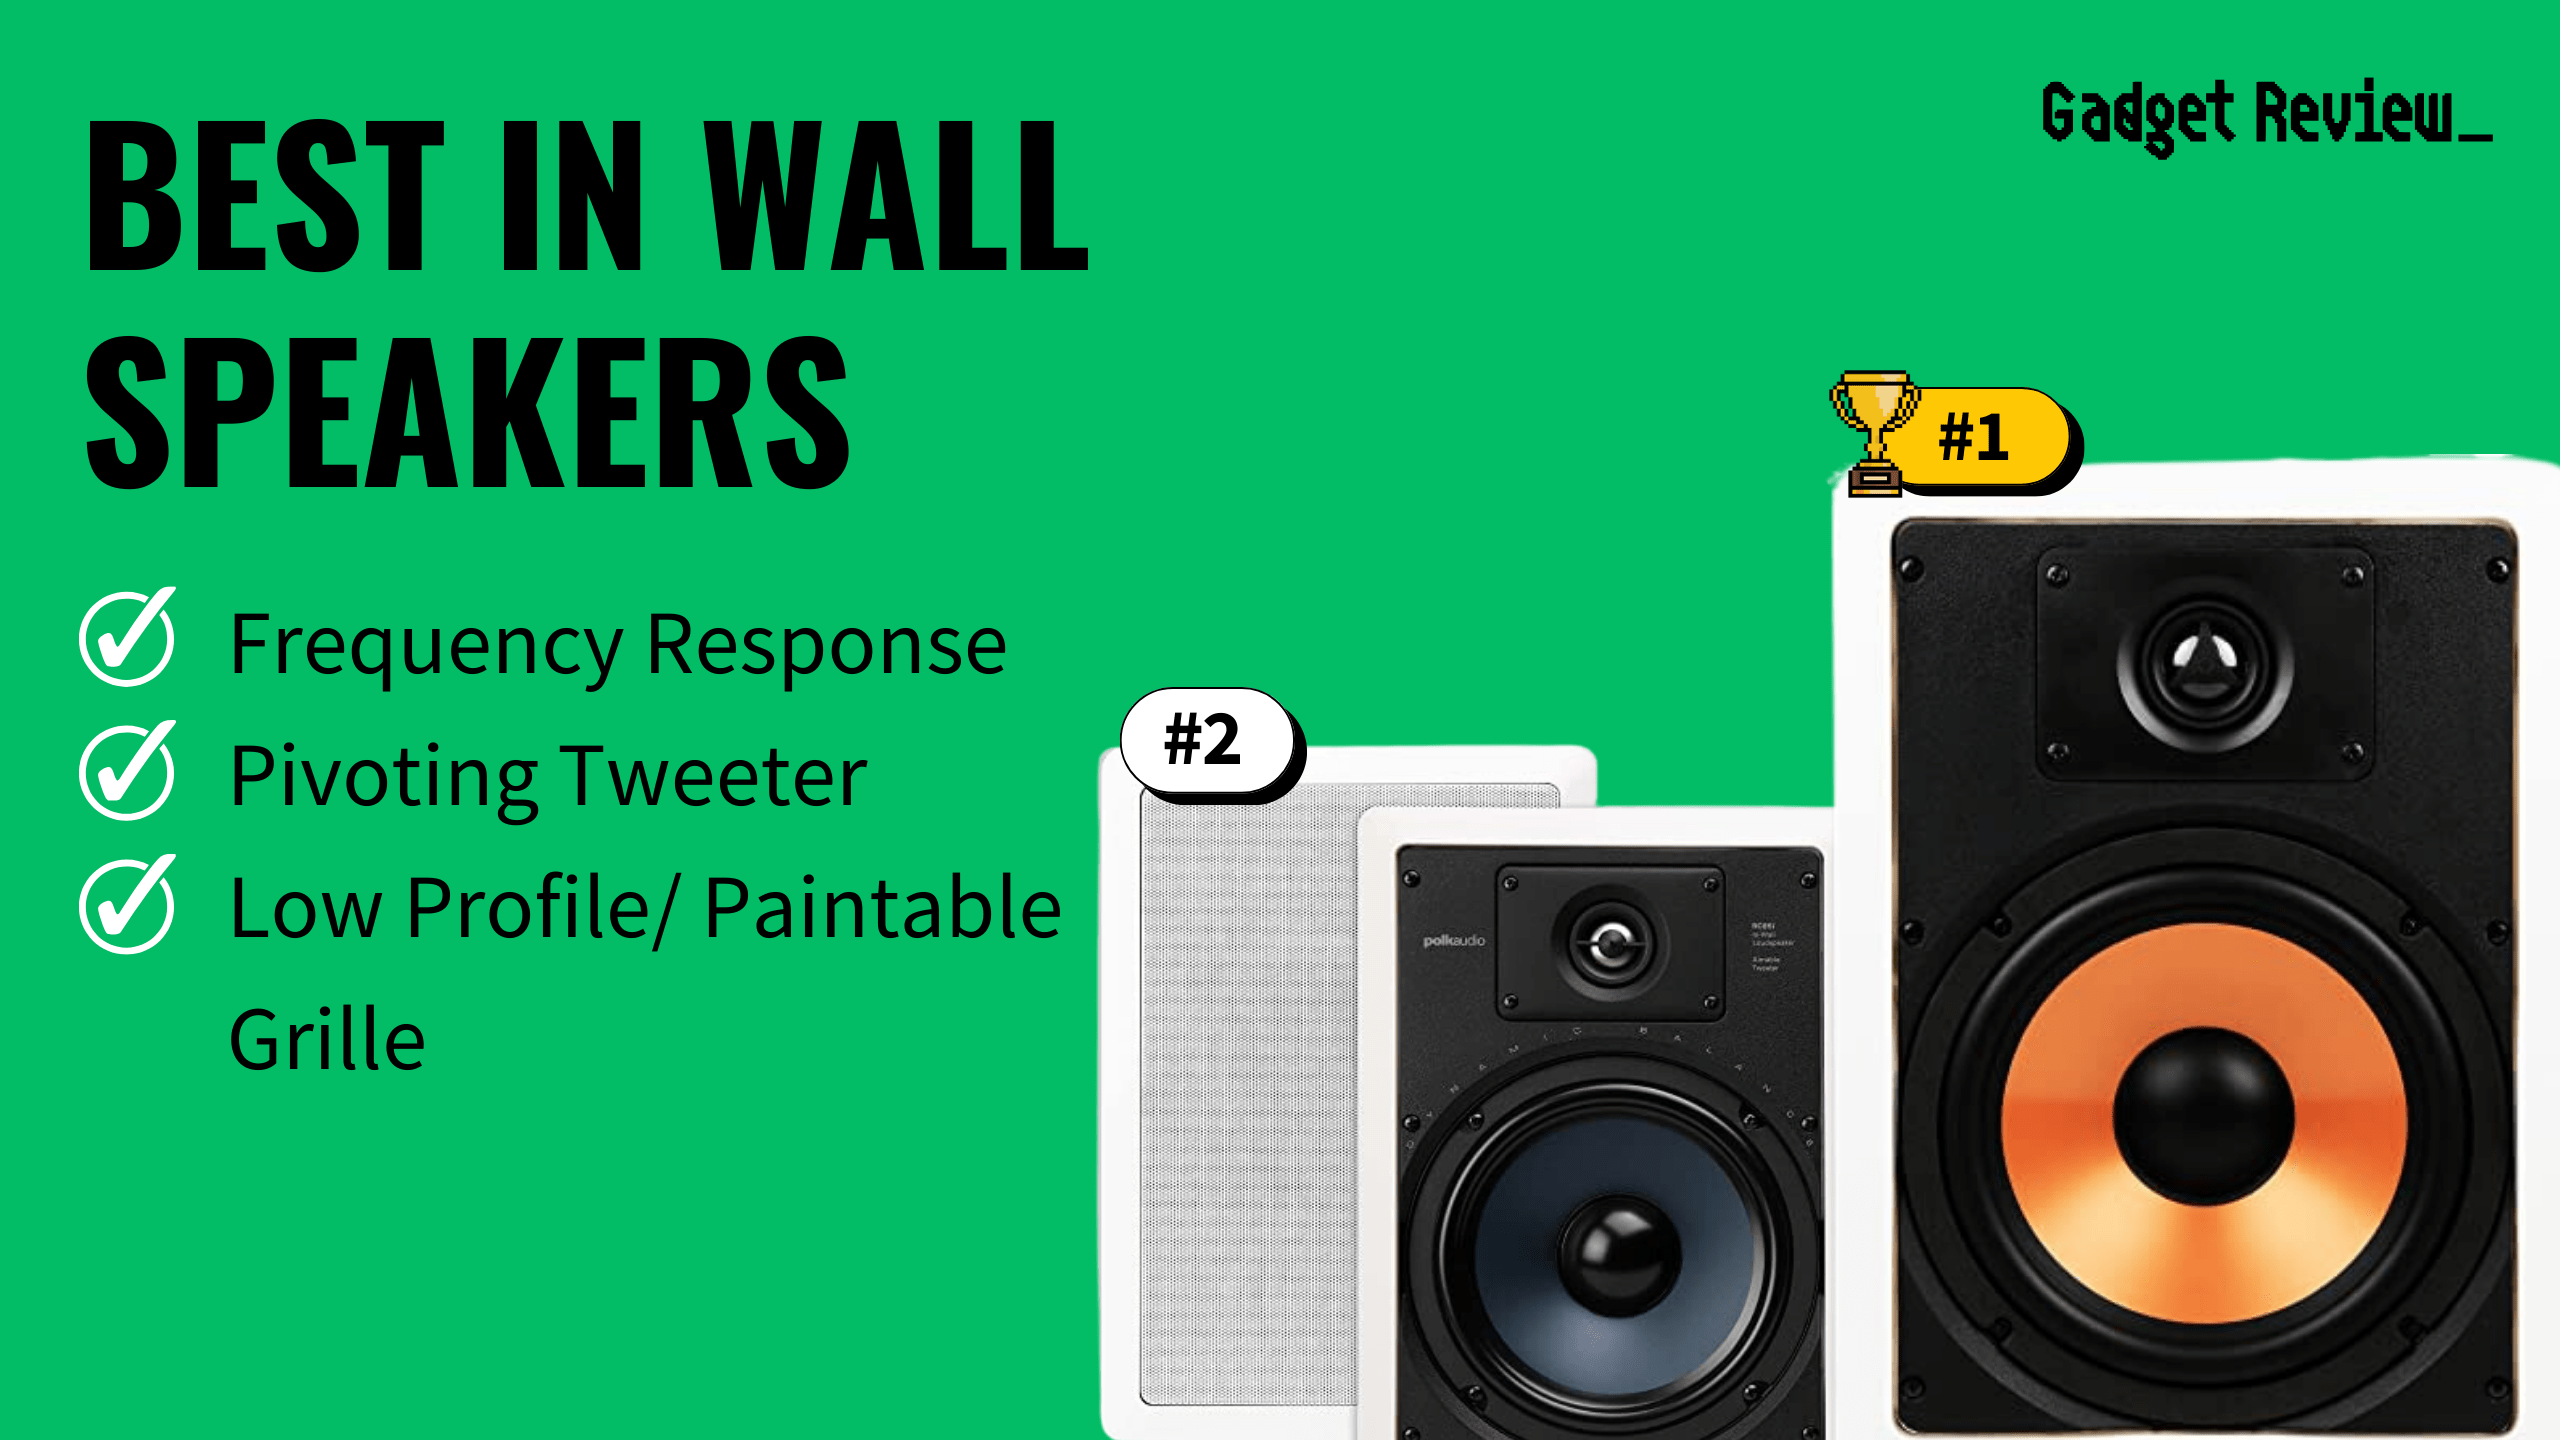 best in wall speakers featured image that shows the top three best speaker models